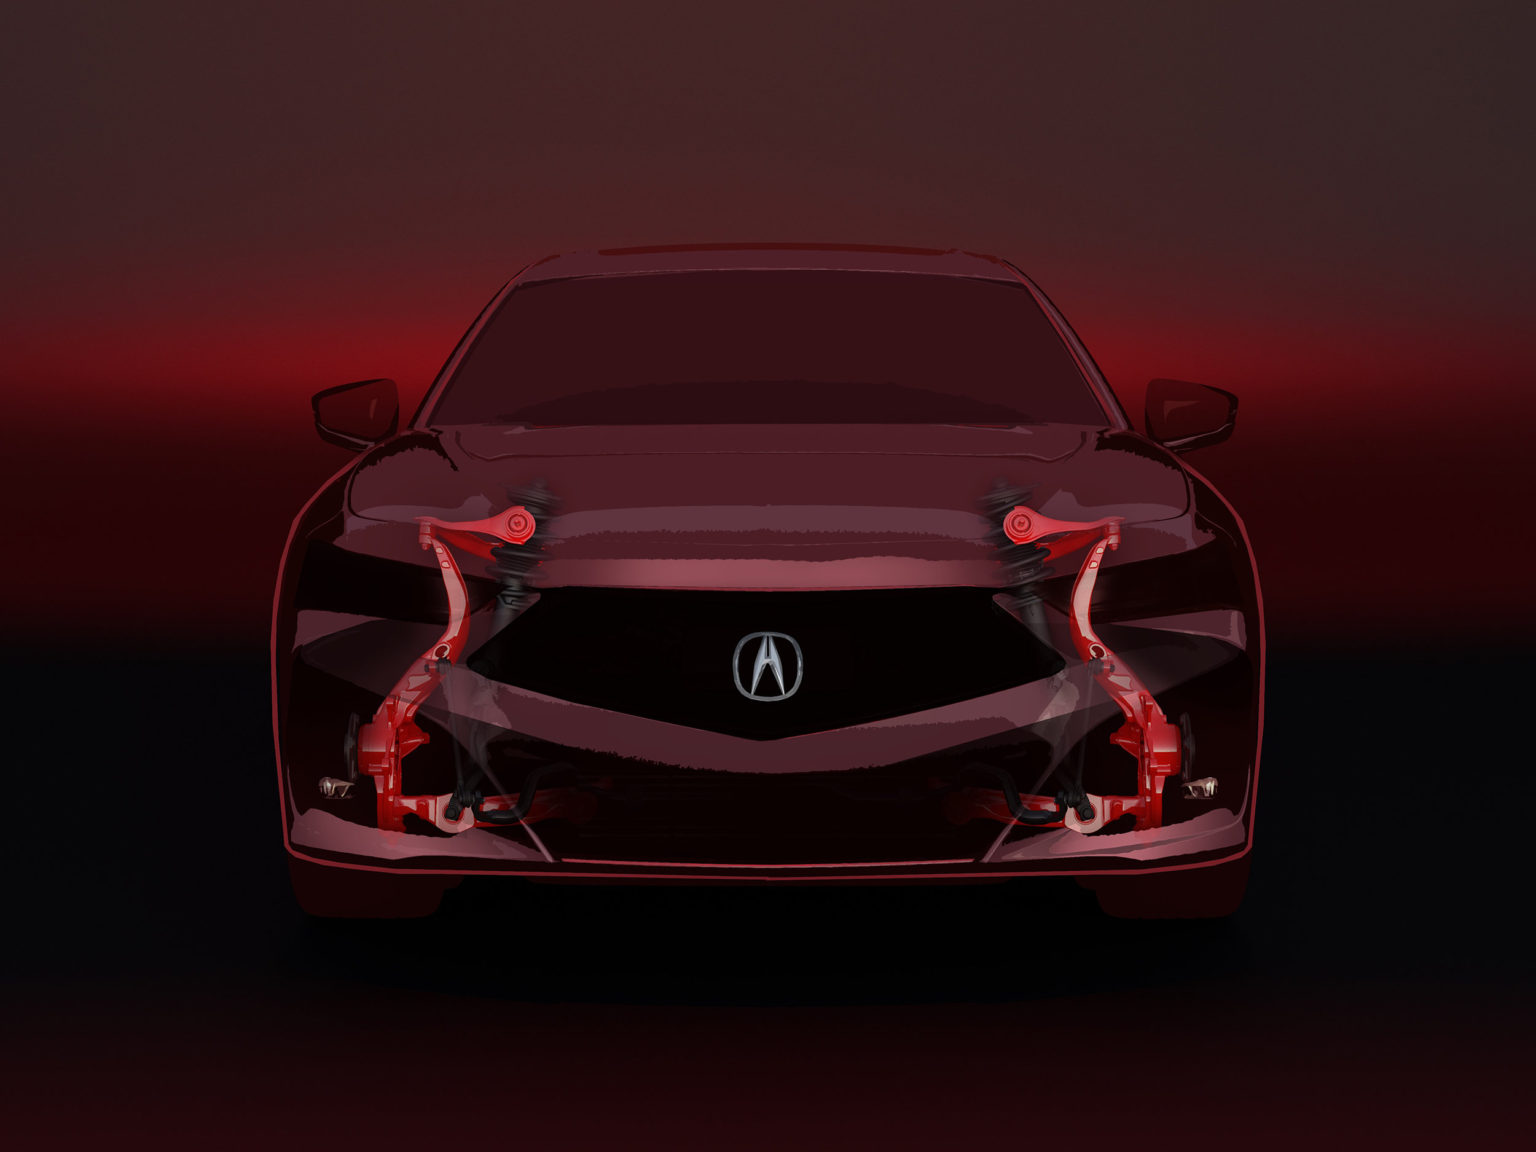 The Acura TLX is set for a complete redesign.